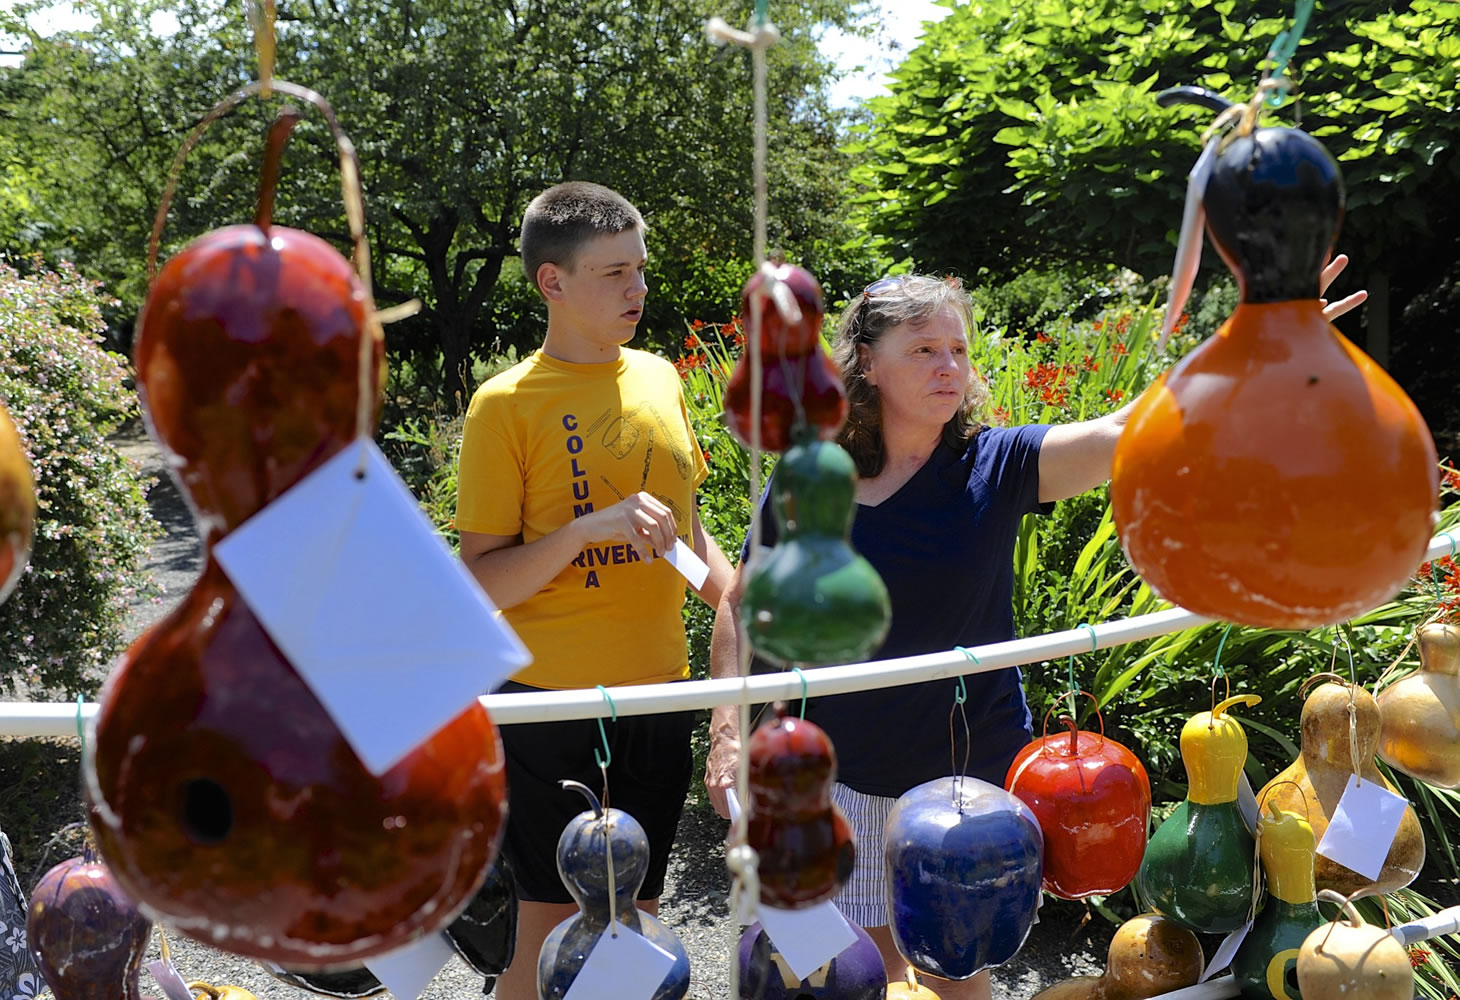 Mona Fuerstenau, right, and Ben Fisher make a selection from Dick Mills' gourd birdhouses at Art in the Garden in Brush Prairie on Sunday.